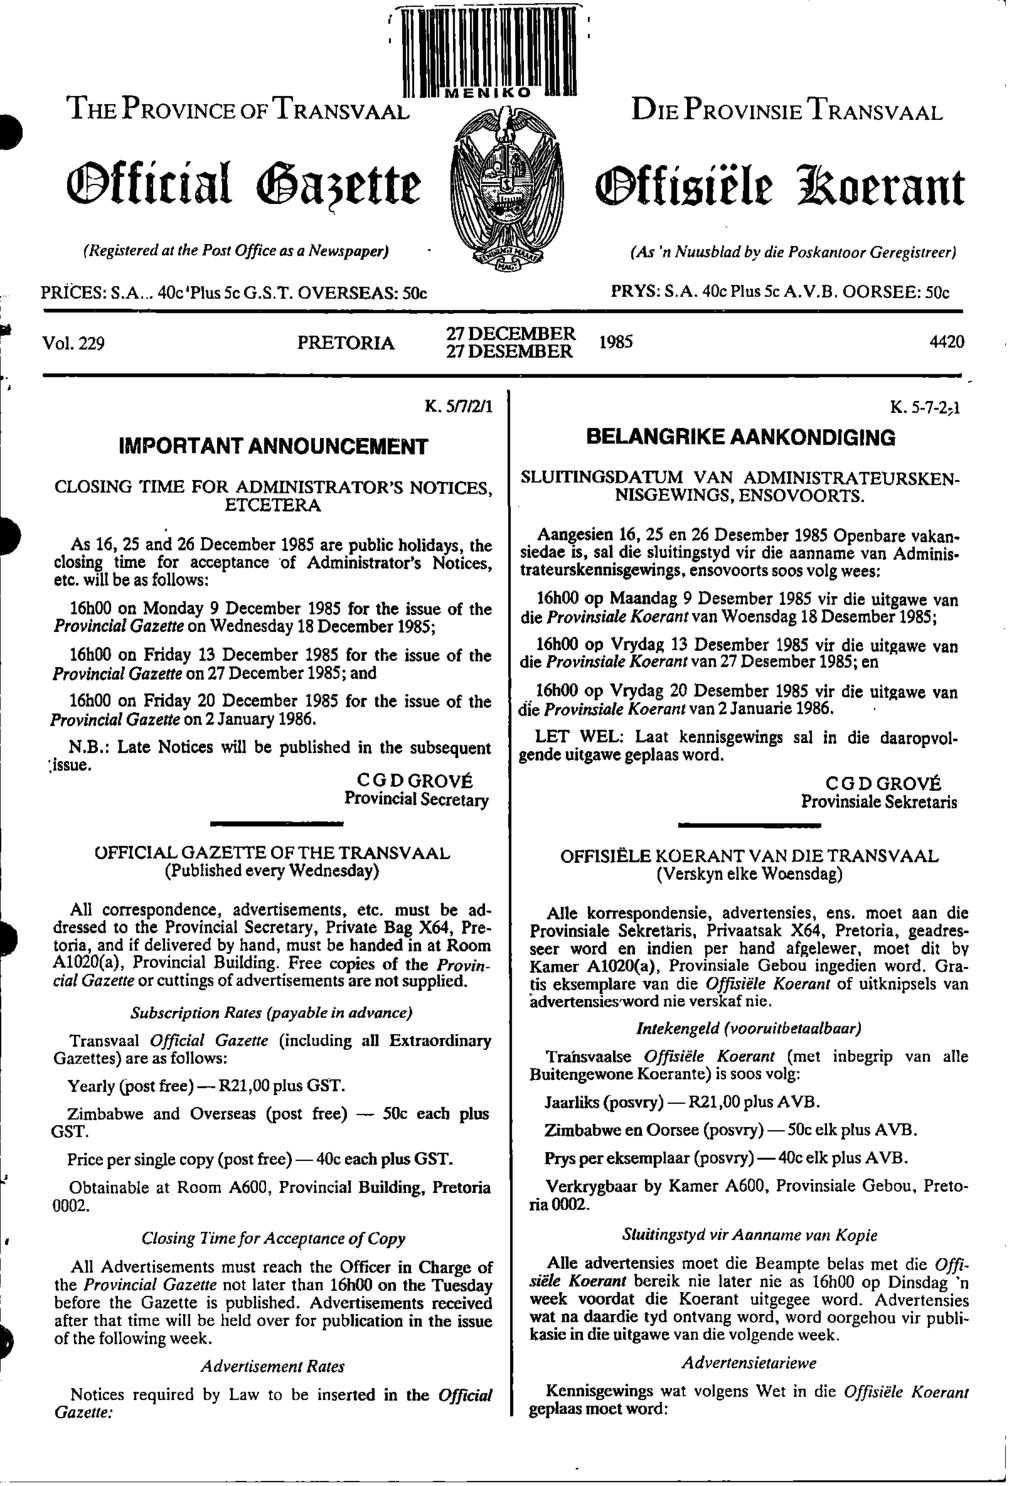 / THE PROVNCE OF TRANSVAAL lig MENKO Sa iiks vt Ht vm,,kollriwr Official ; a3rtte \\a ped DE PROVNSE TRANSVAAL isifisfele Roerant vriftii (Registered at the Post Office as a Newspaper),,,a (As in